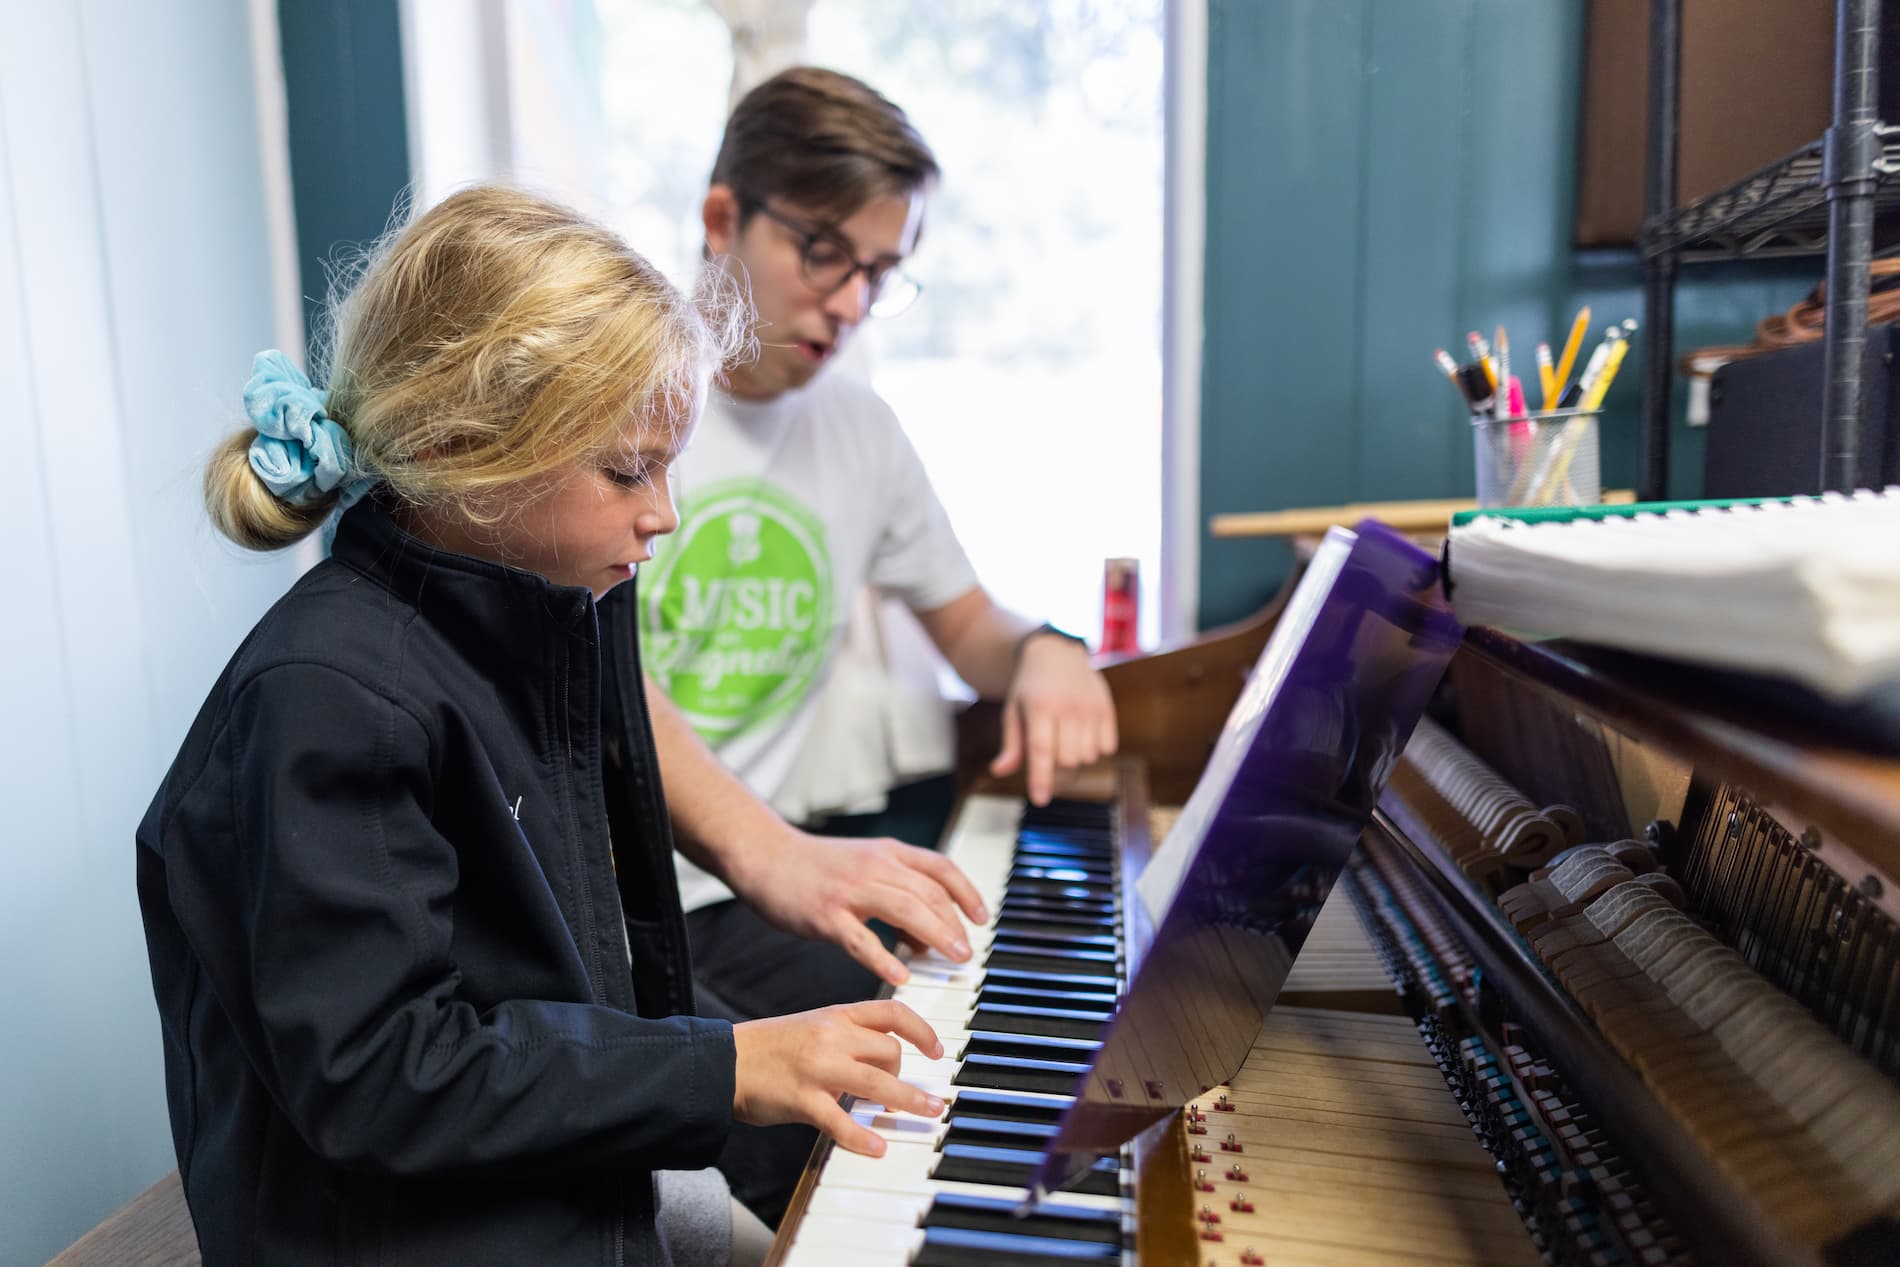 Instructor and student sitting at a piano lesson